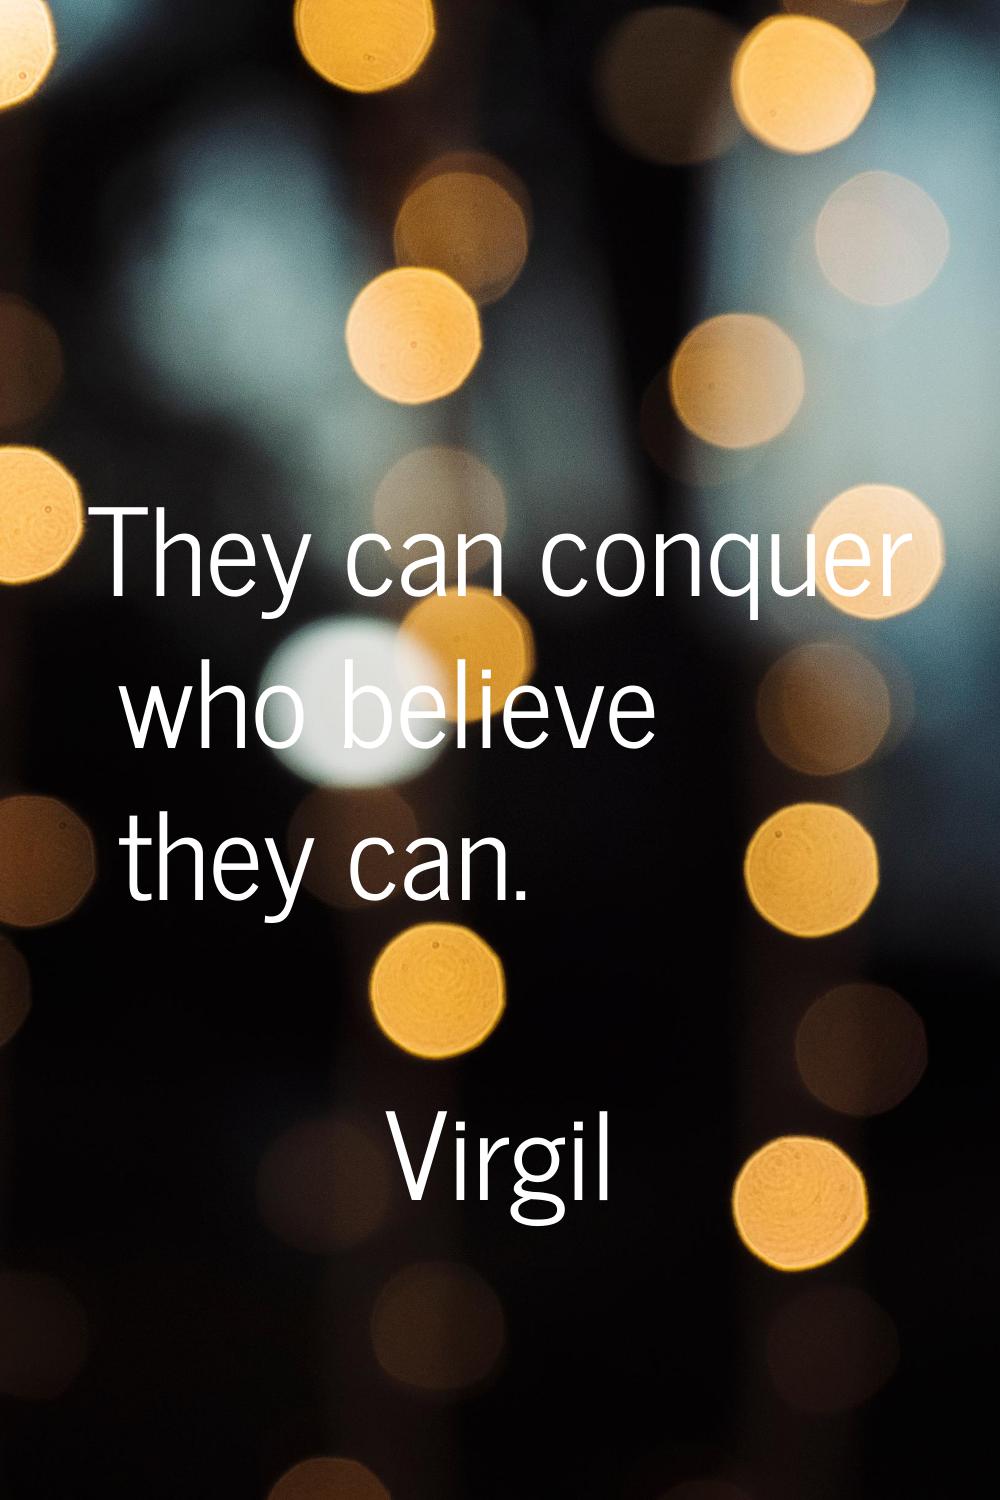 They can conquer who believe they can.